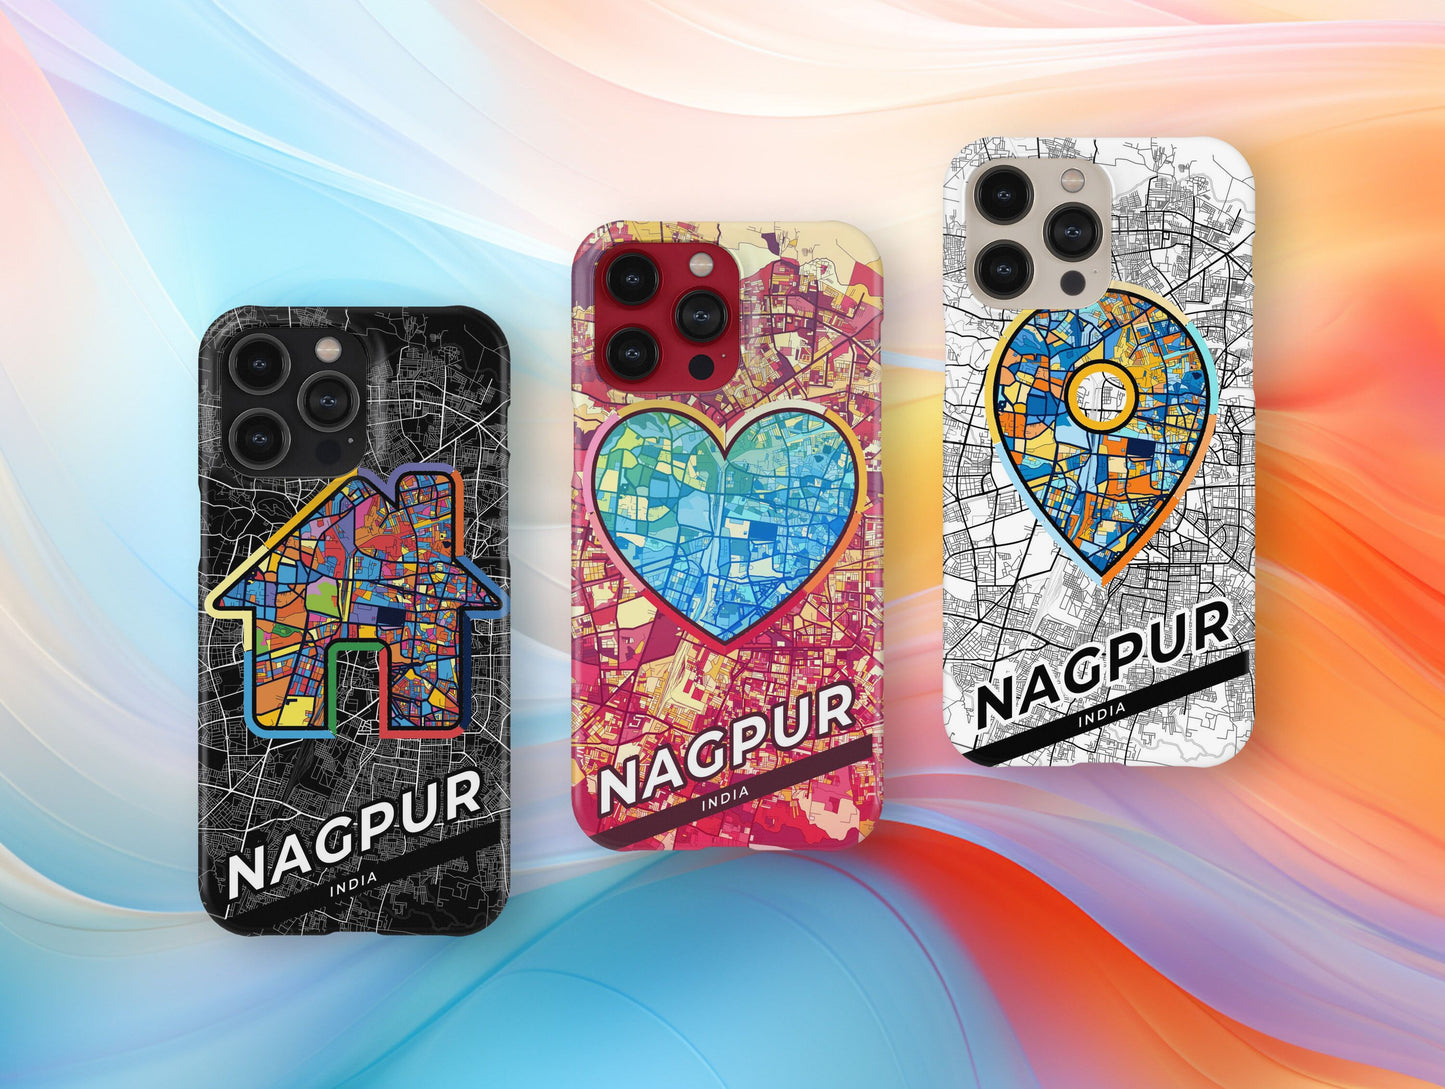 Nagpur India slim phone case with colorful icon